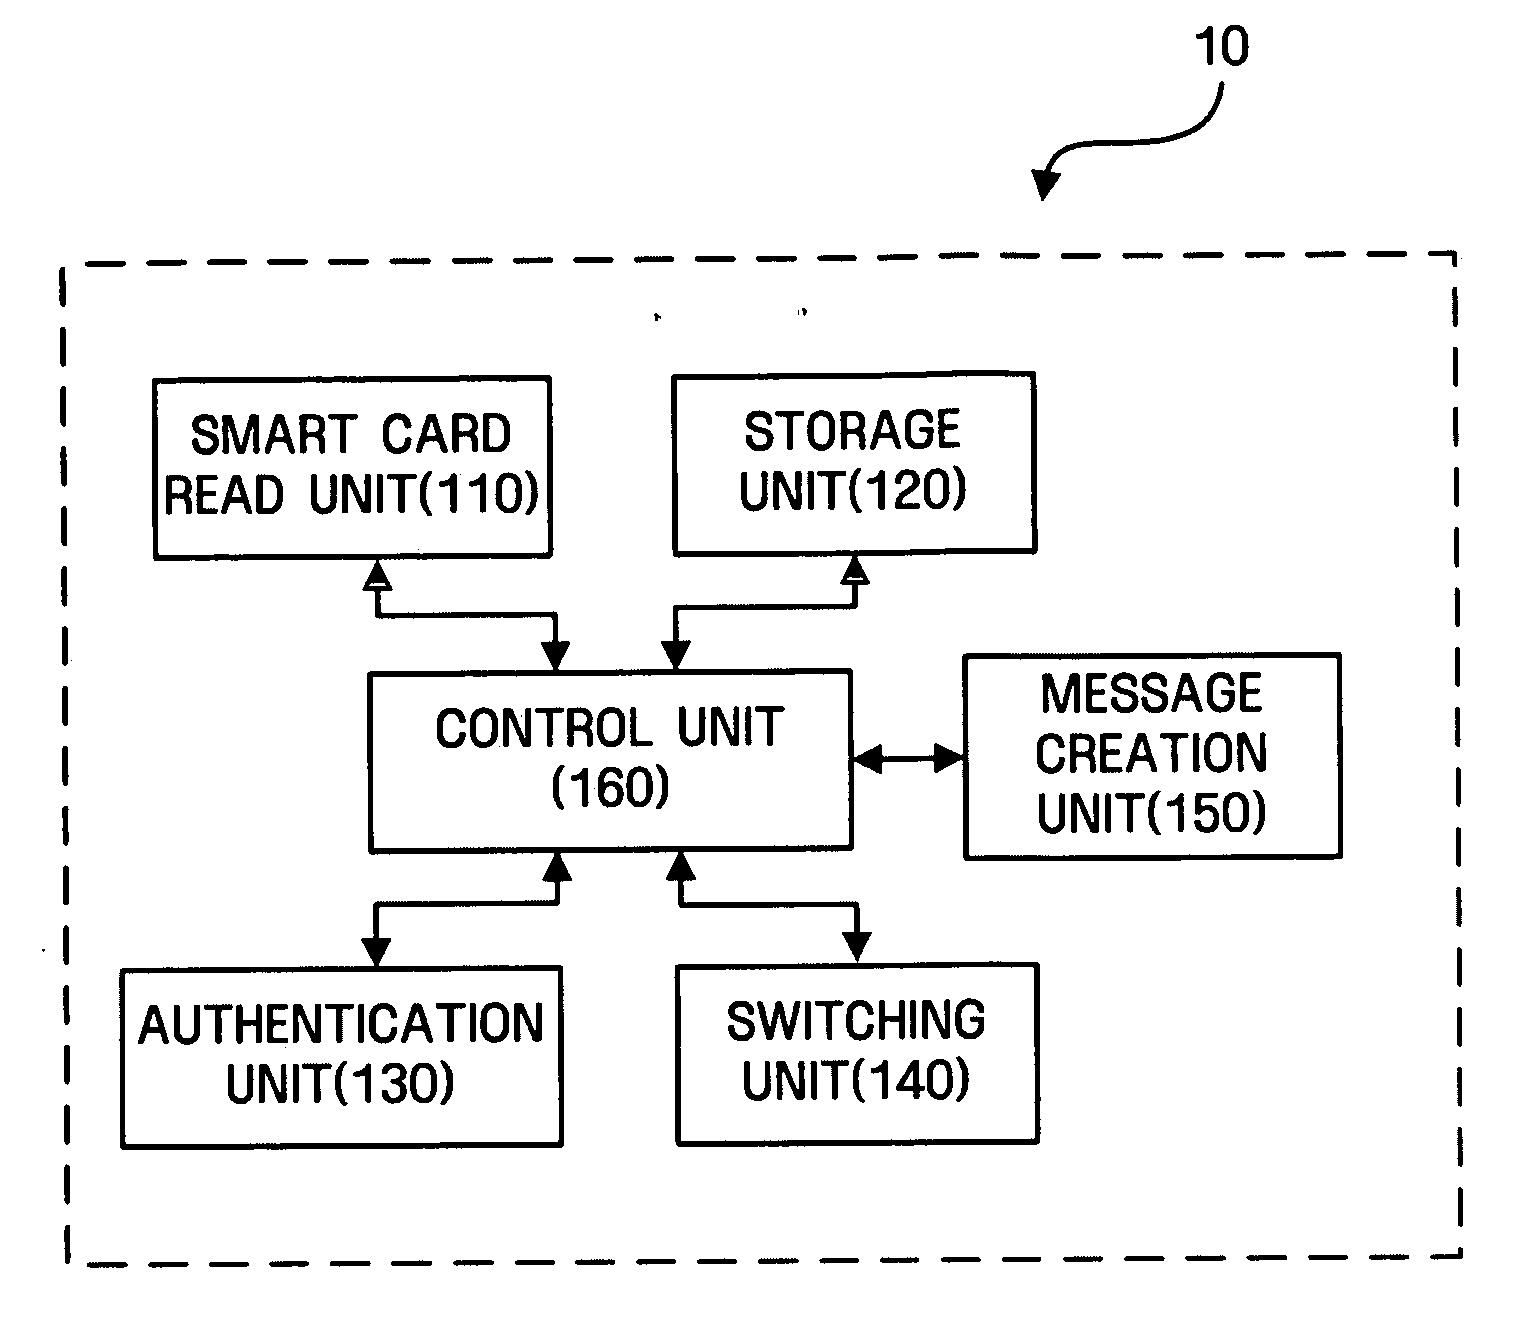 Apparatus and method for executing security function using smart card